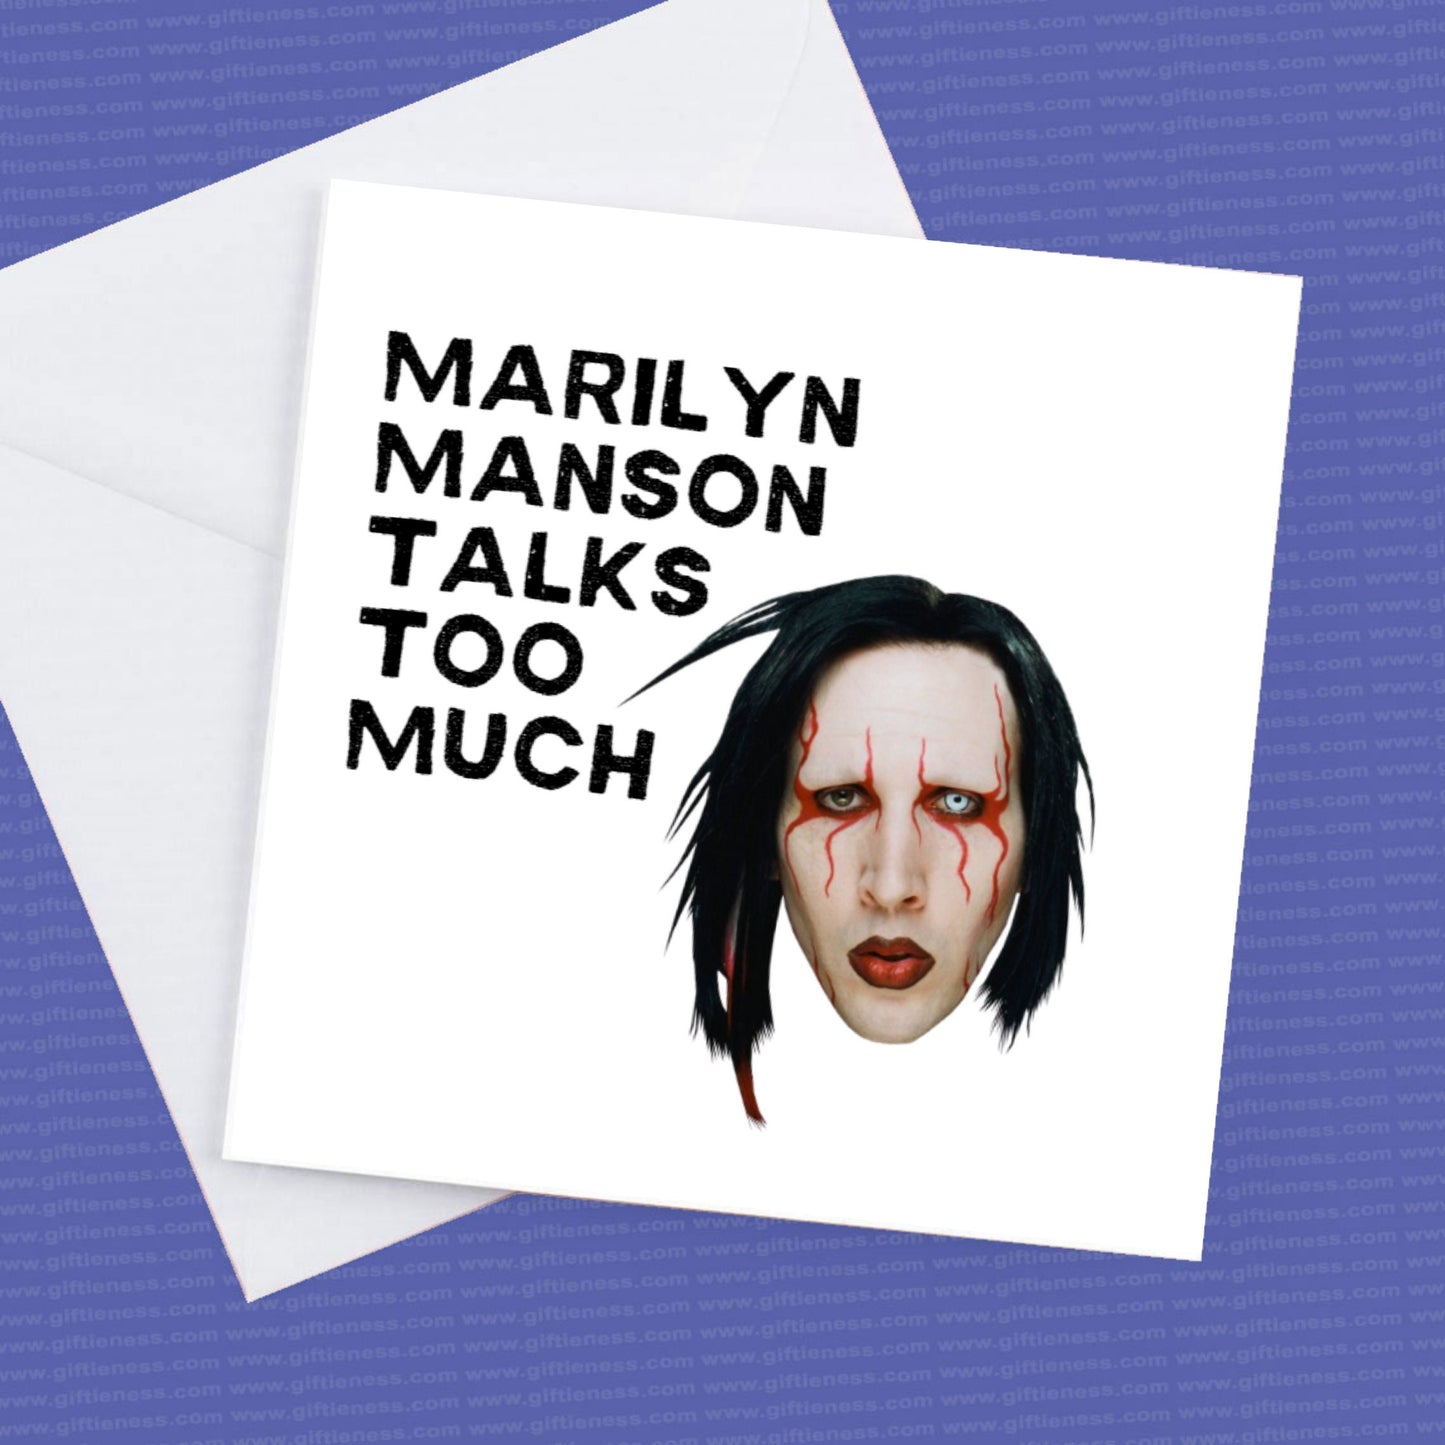 Marilyn Manson Talks Too Much Card and Envelope